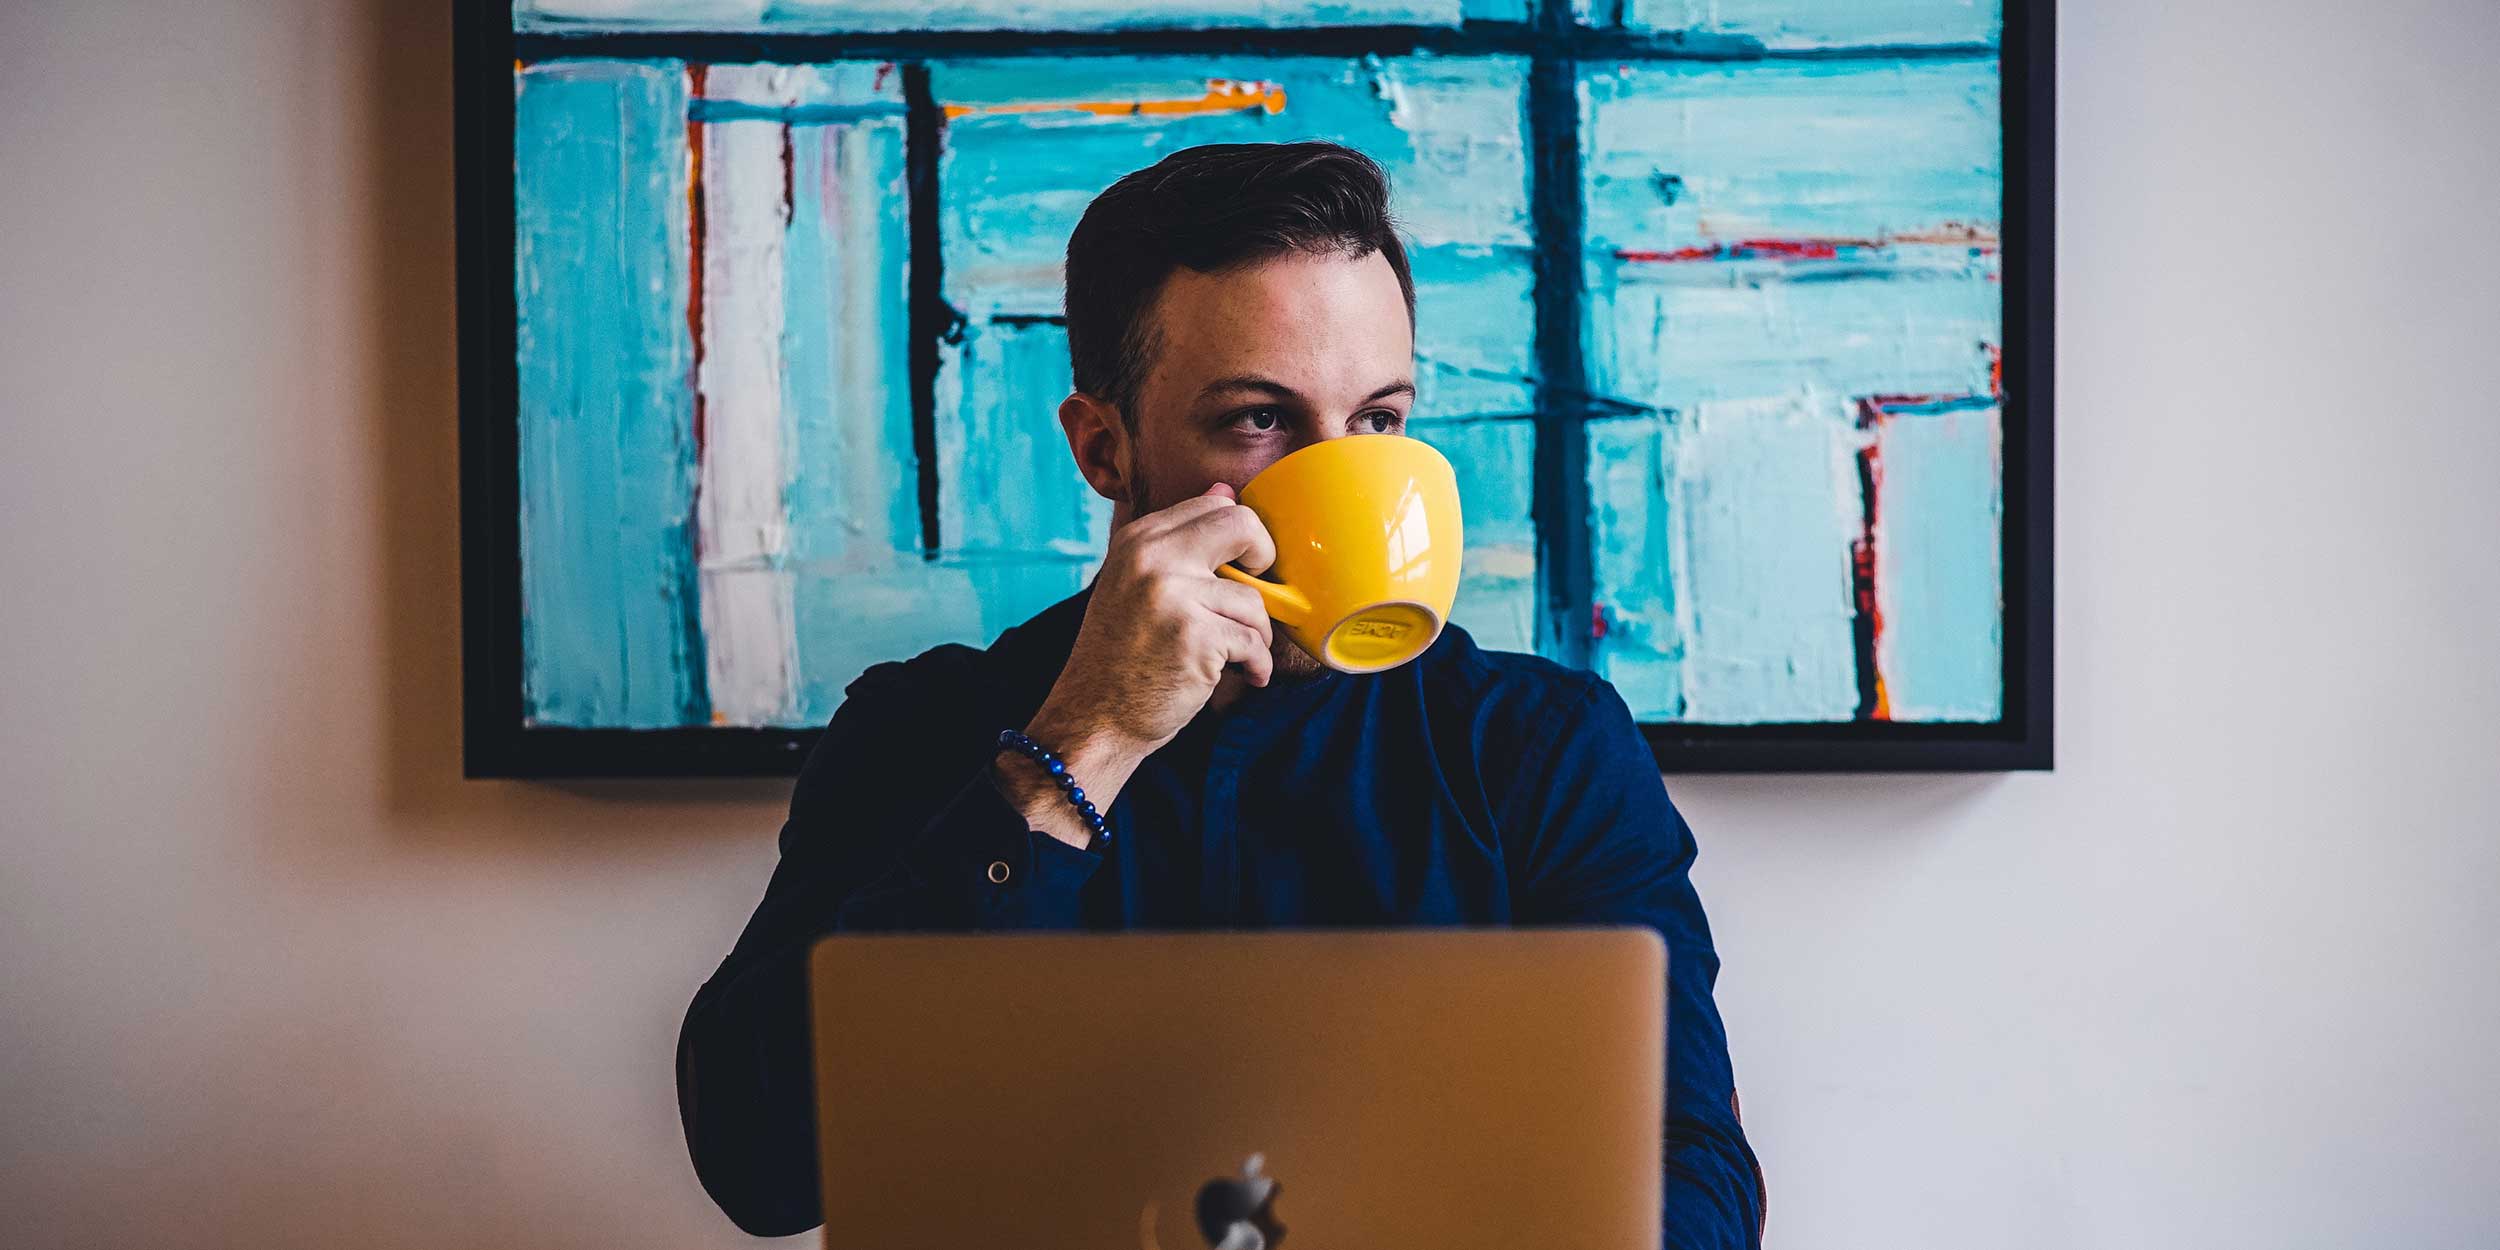 Enjoyed by millions every day, the benefits of coffee in the workplace are numerous. In fact, it feels as if coffee powers a significant proportion of the global workforce. Here, we explore five ways that coffee can make you sharper, healthier and happier at work.